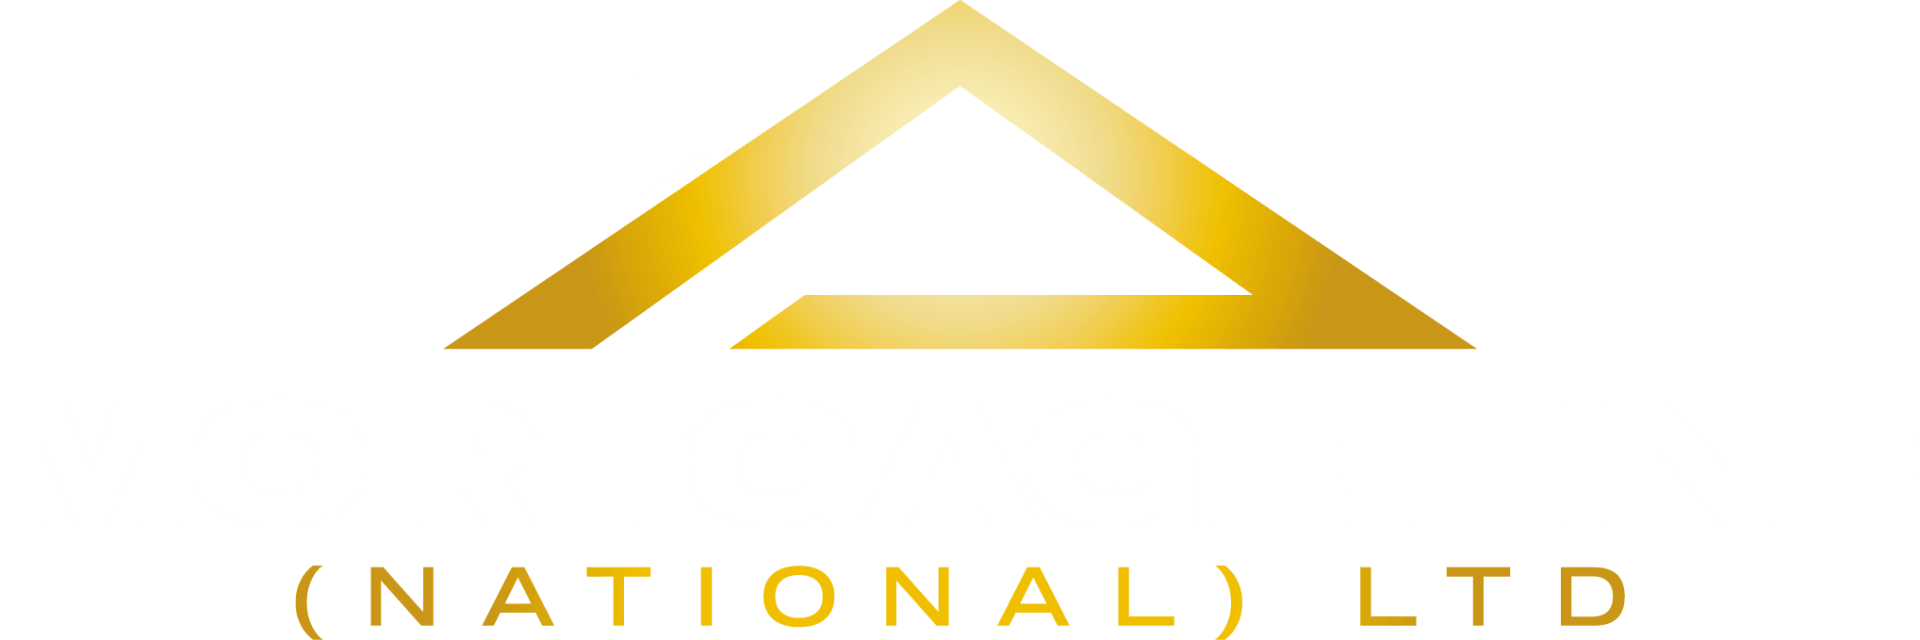 Mortgage broker in Motherwell, Glasgow - Mortgage Line logo